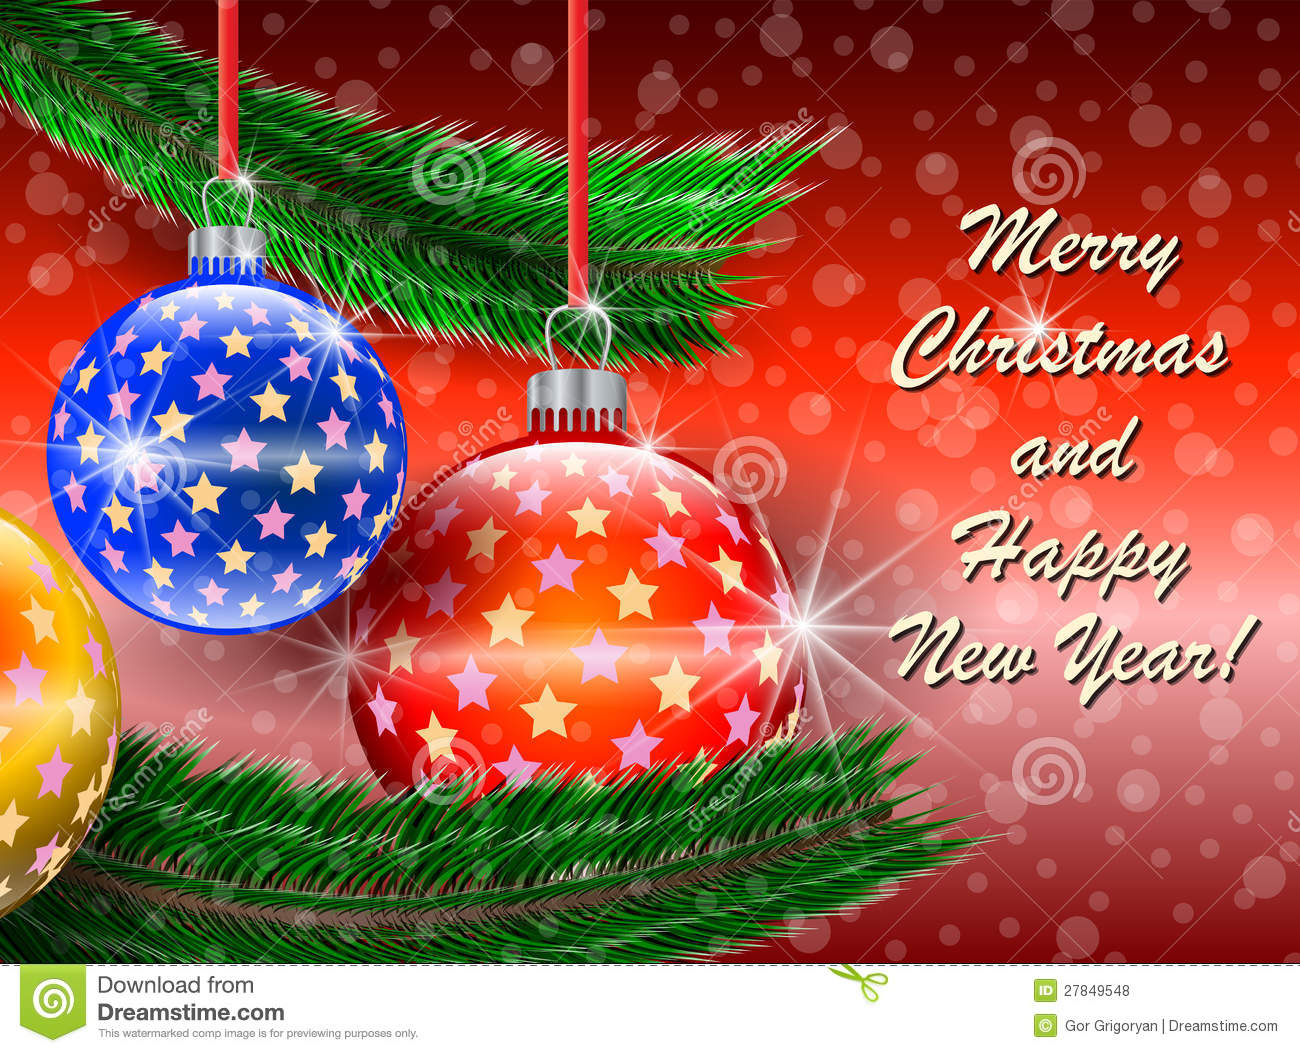 Merry Christmas Happy New Year Images | Free Vectors